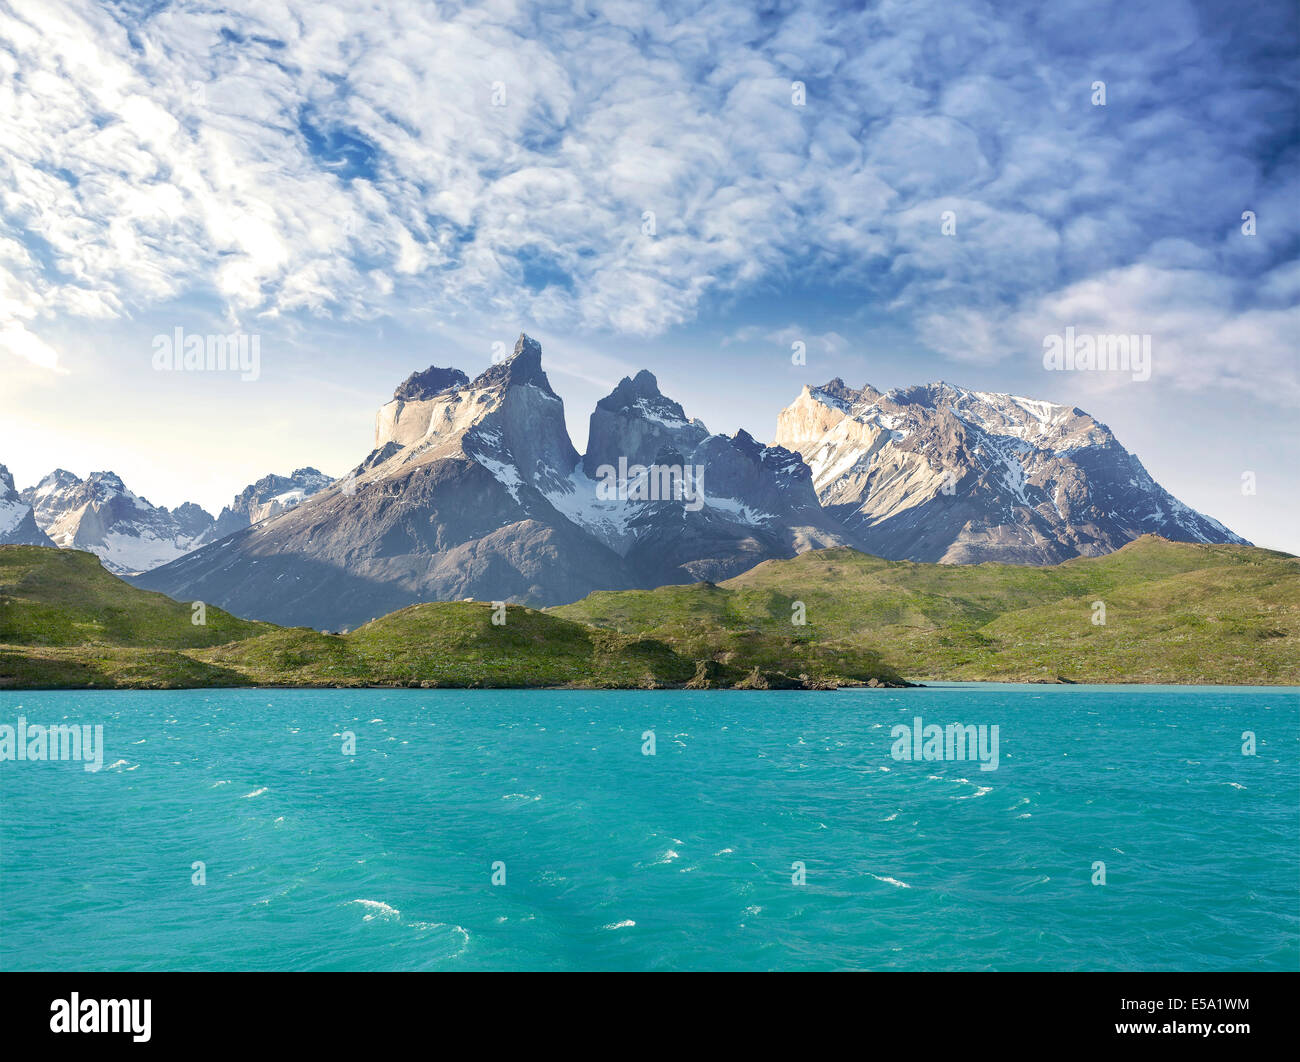 Pehoe mountain lake and Los Cuernos, Torres del Paine National Park, Chile. Stock Photo